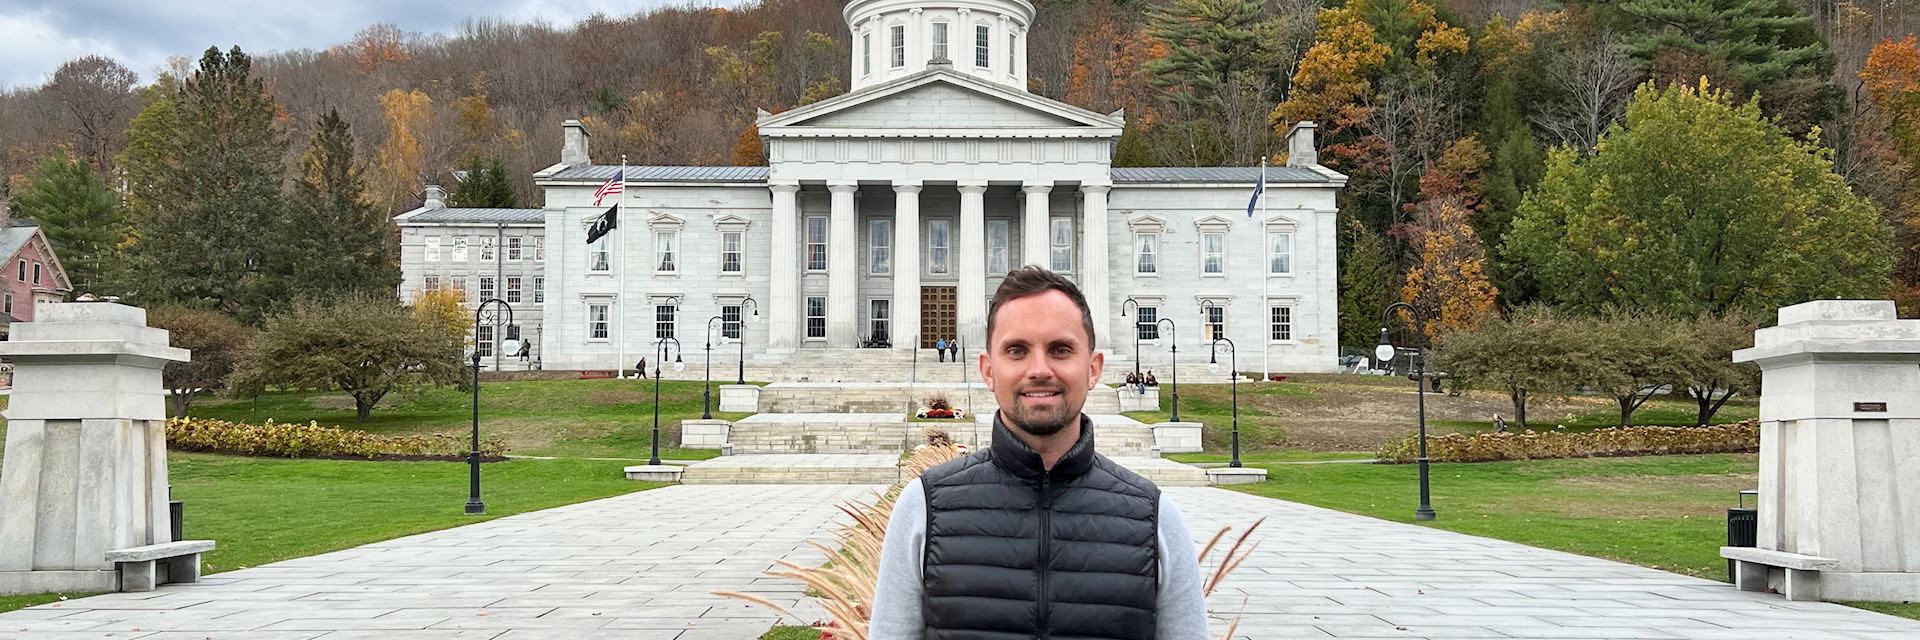 James visiting Vermont State House, USA